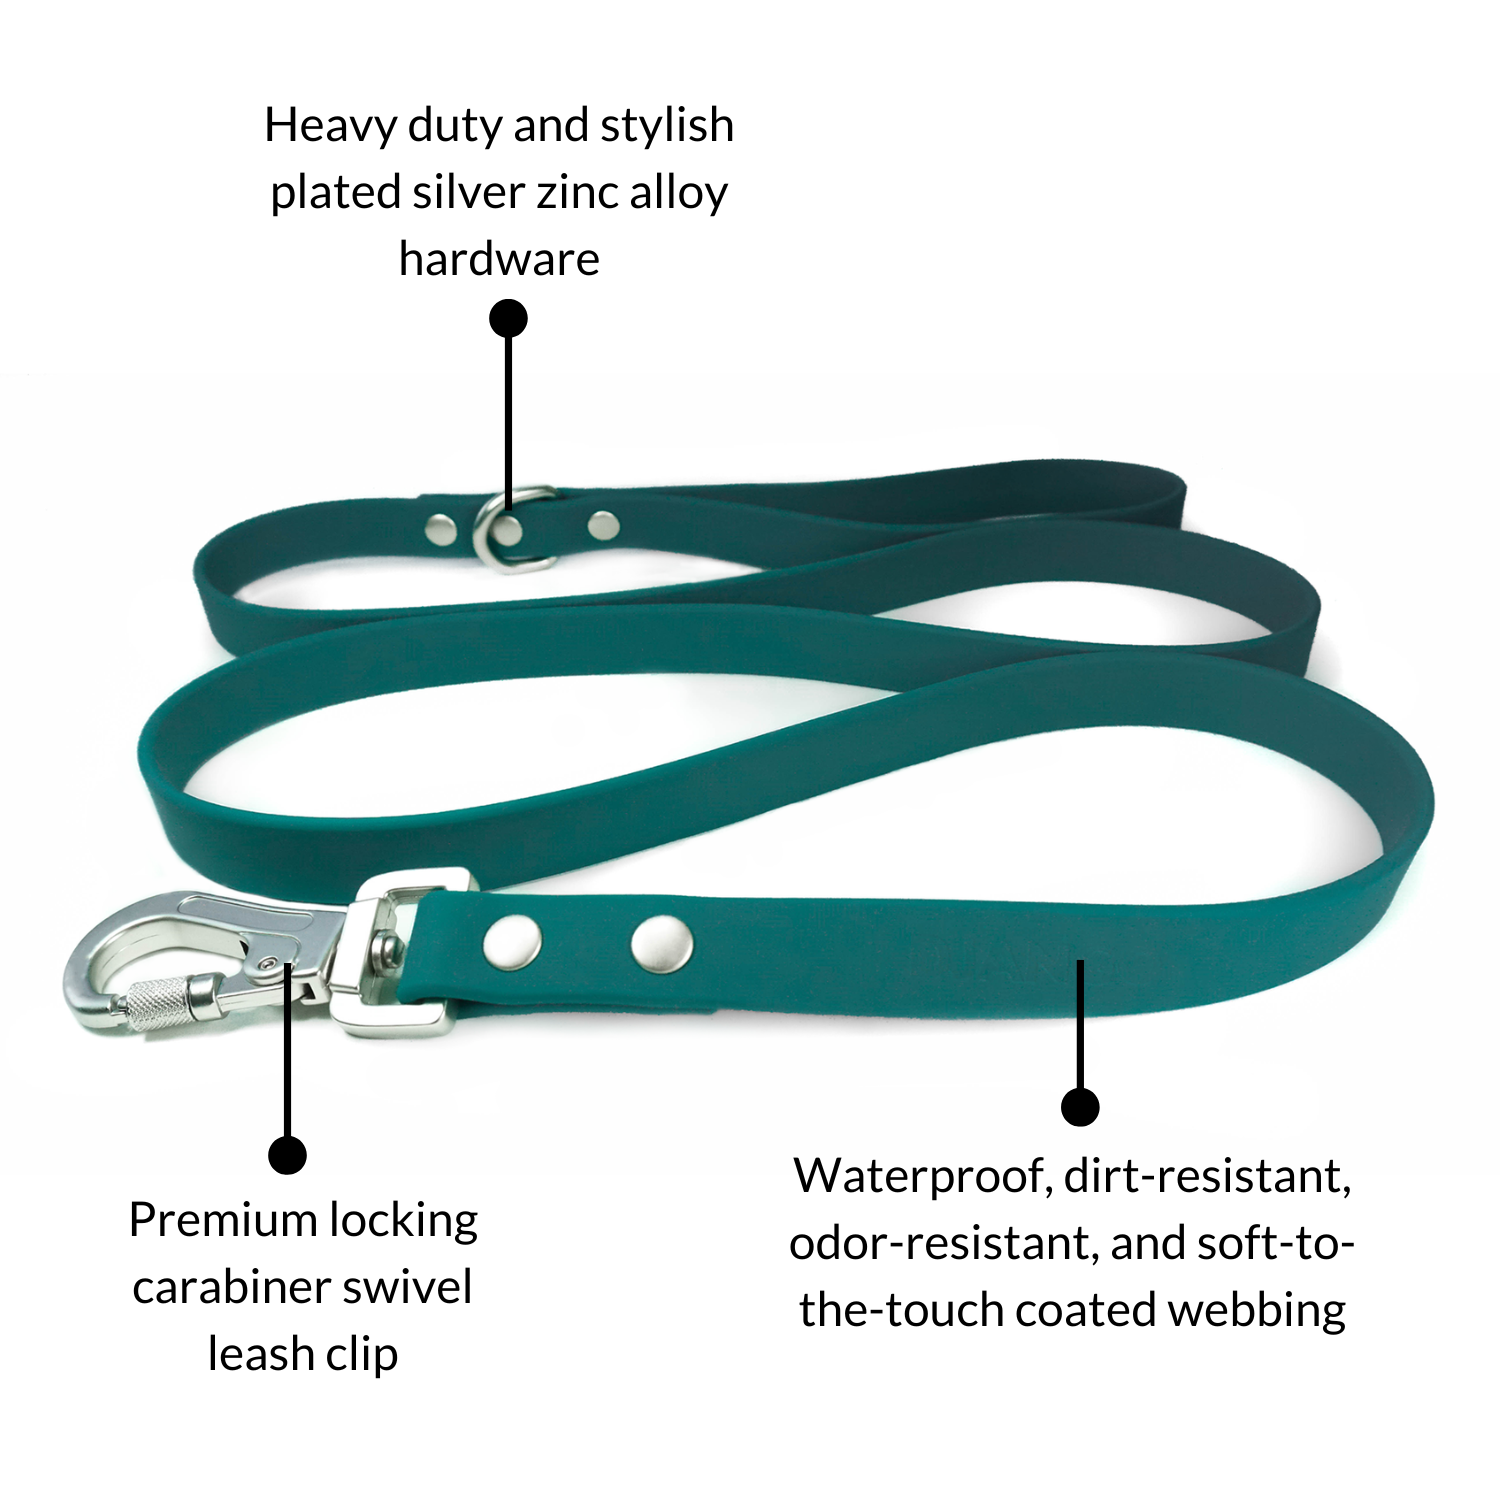 DJANGO Tahoe Dog Leash in Dark Teal - The waterproof dog leash features heavy duty and stylish plated silver hardware and a premium locking carabiner leash clip for extra security - djangobrand.com 